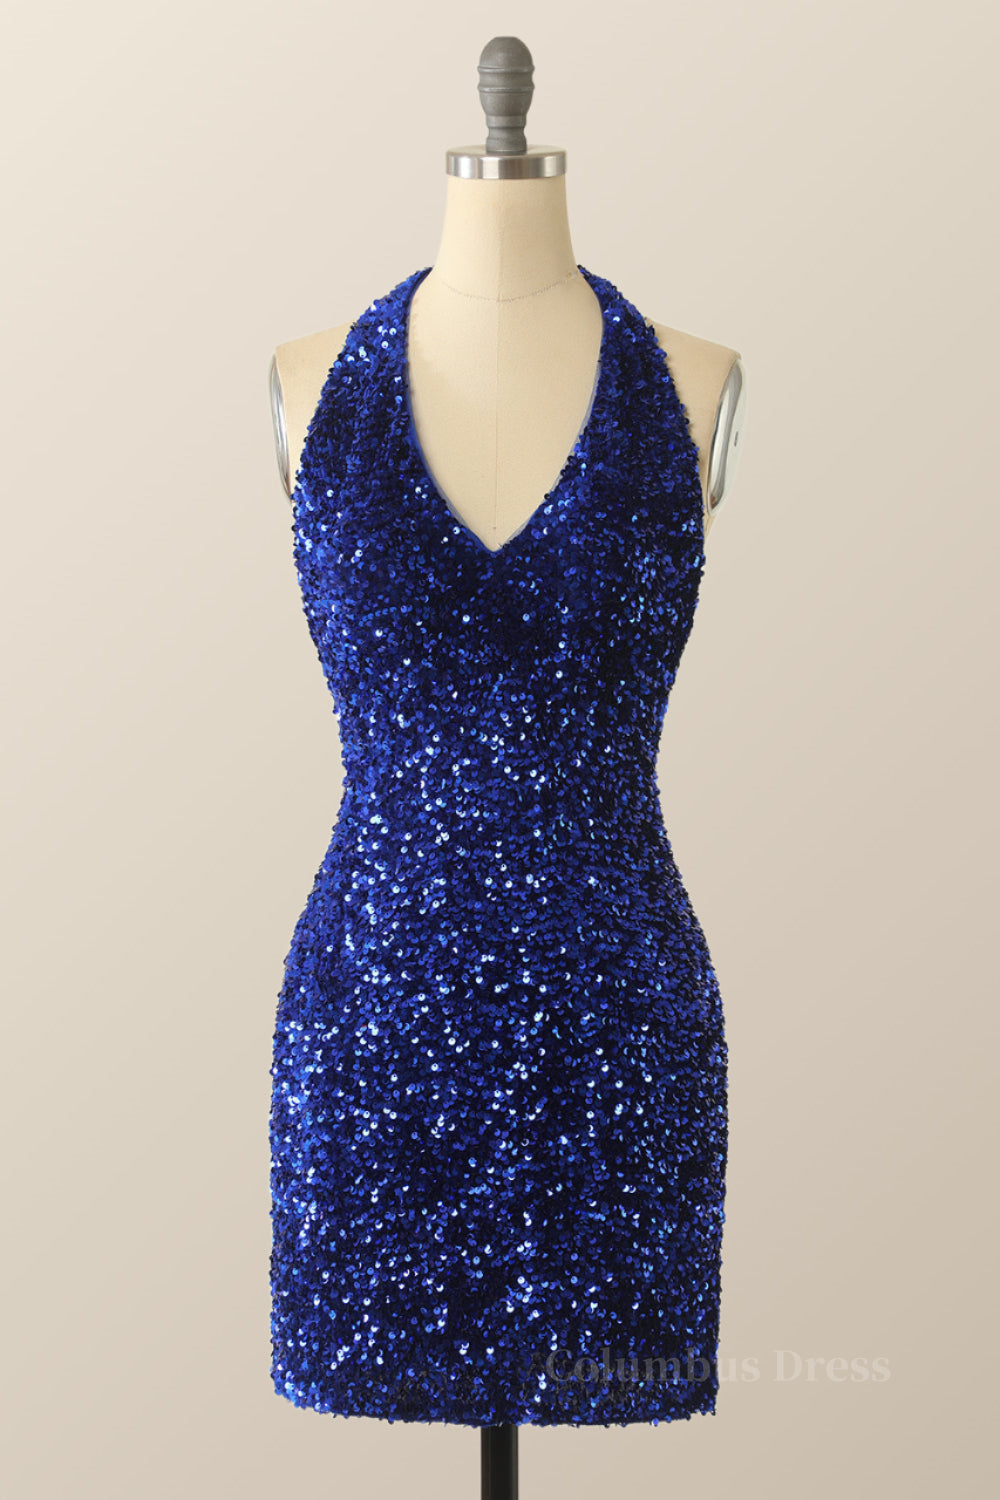 Halter Royal Blue Sequin Bodycon Dress outfits, Homecoming Dress Sweetheart